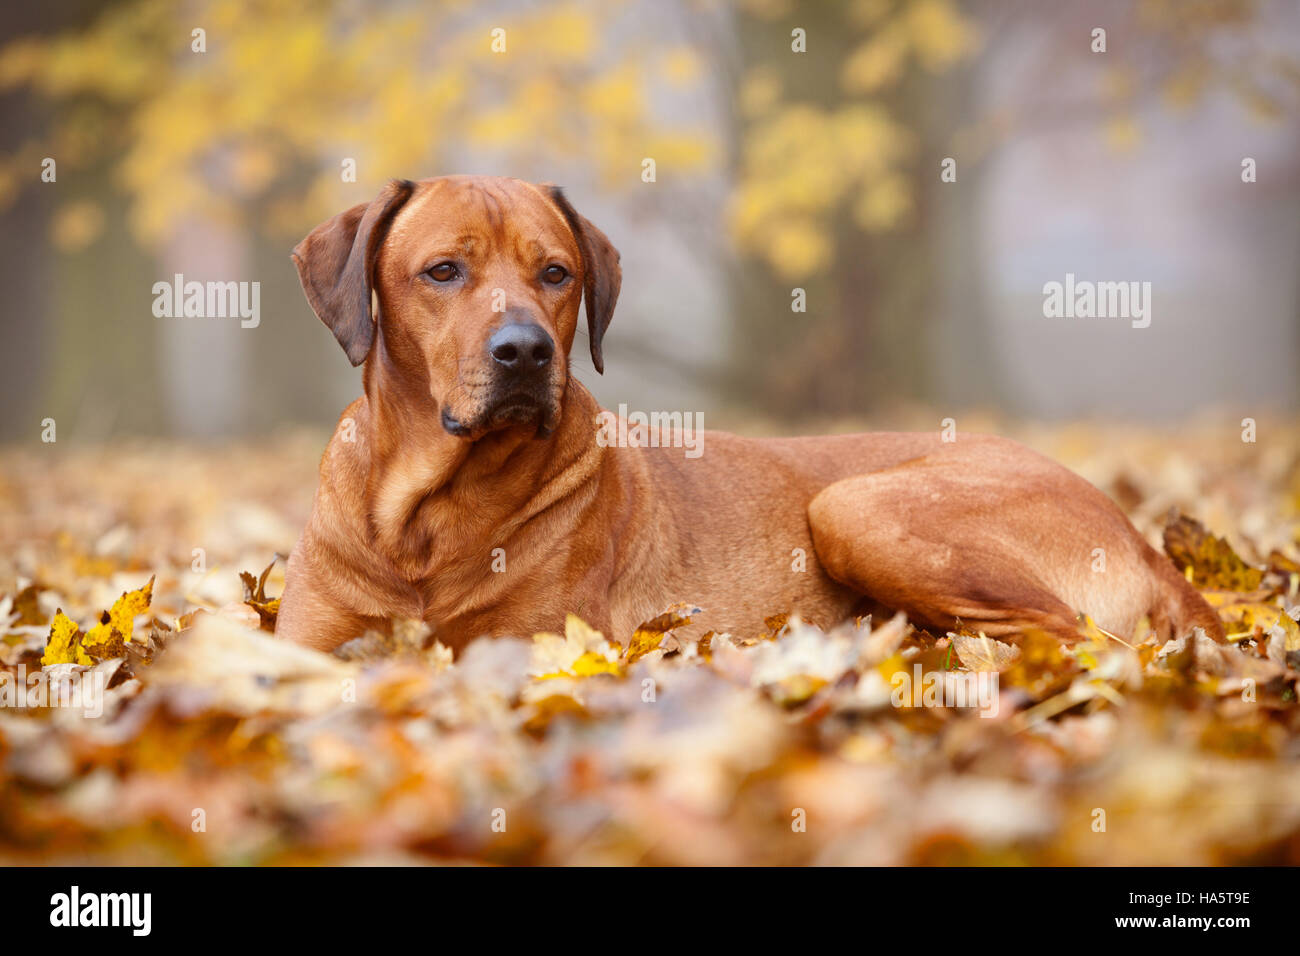 A Rhodesian Ridgeback dog laying down in leaves in a park on an autumn day. England, UK. November 2016. Stock Photo